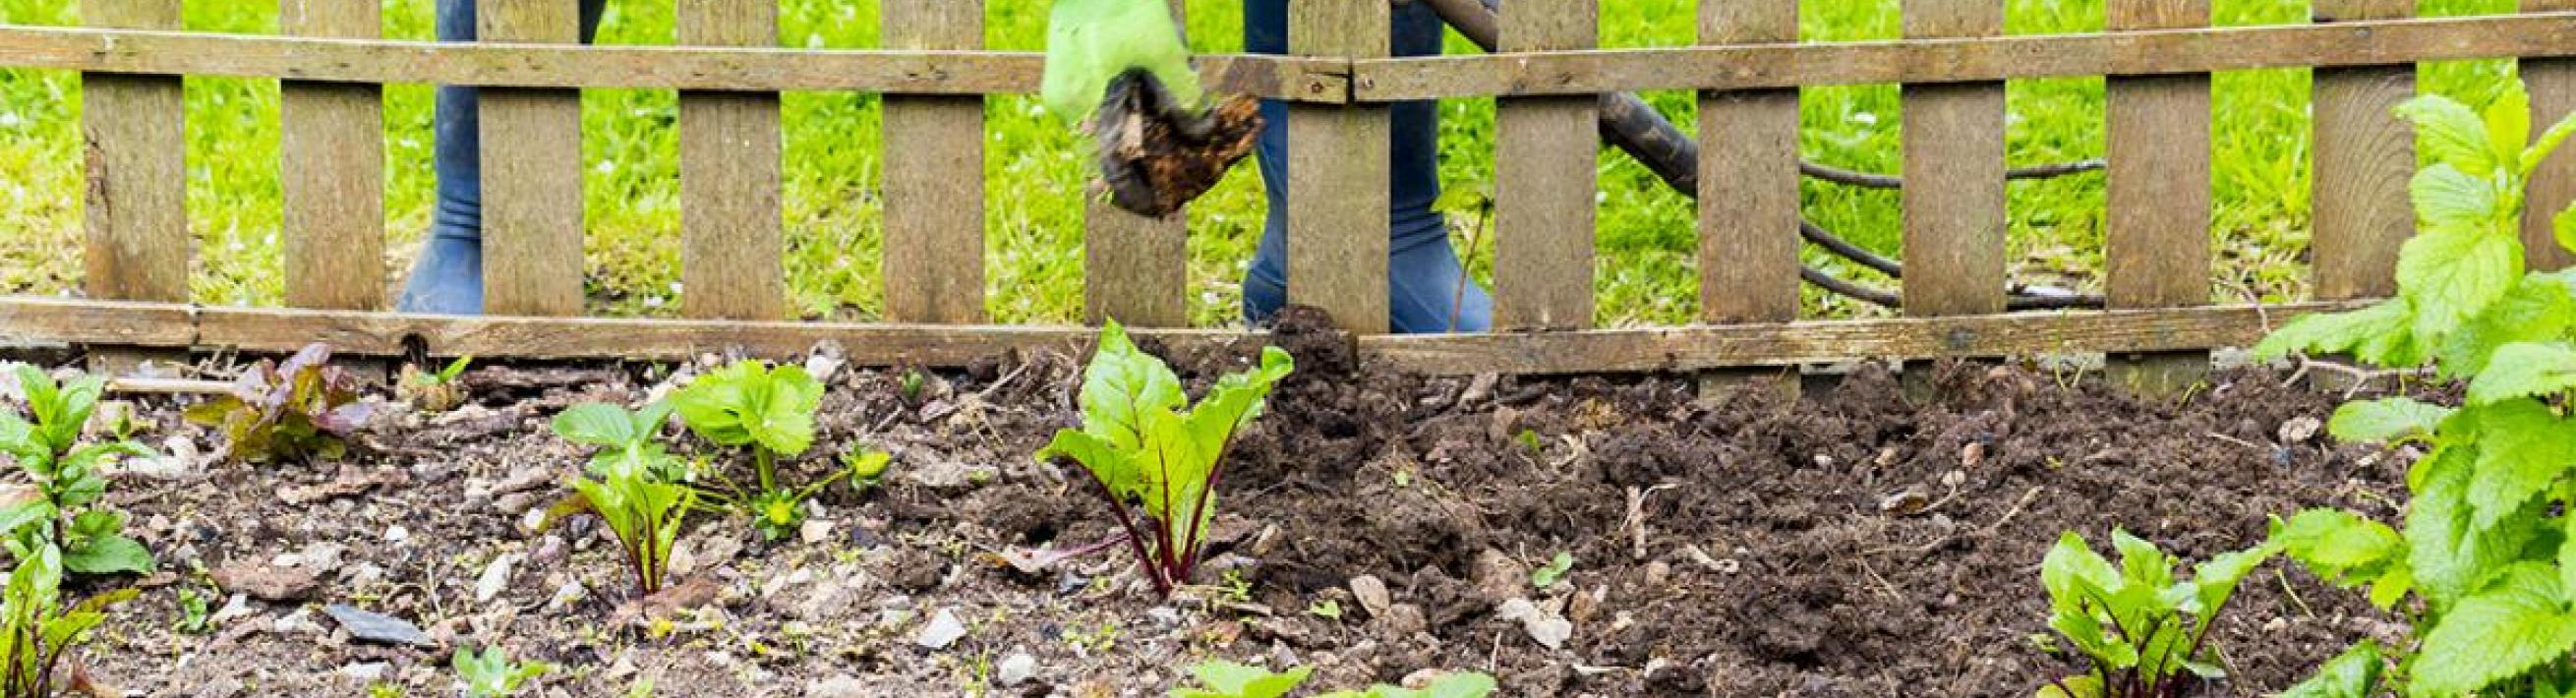 gardent with beet shoots and a hand reaching down over a short fence to do weeding